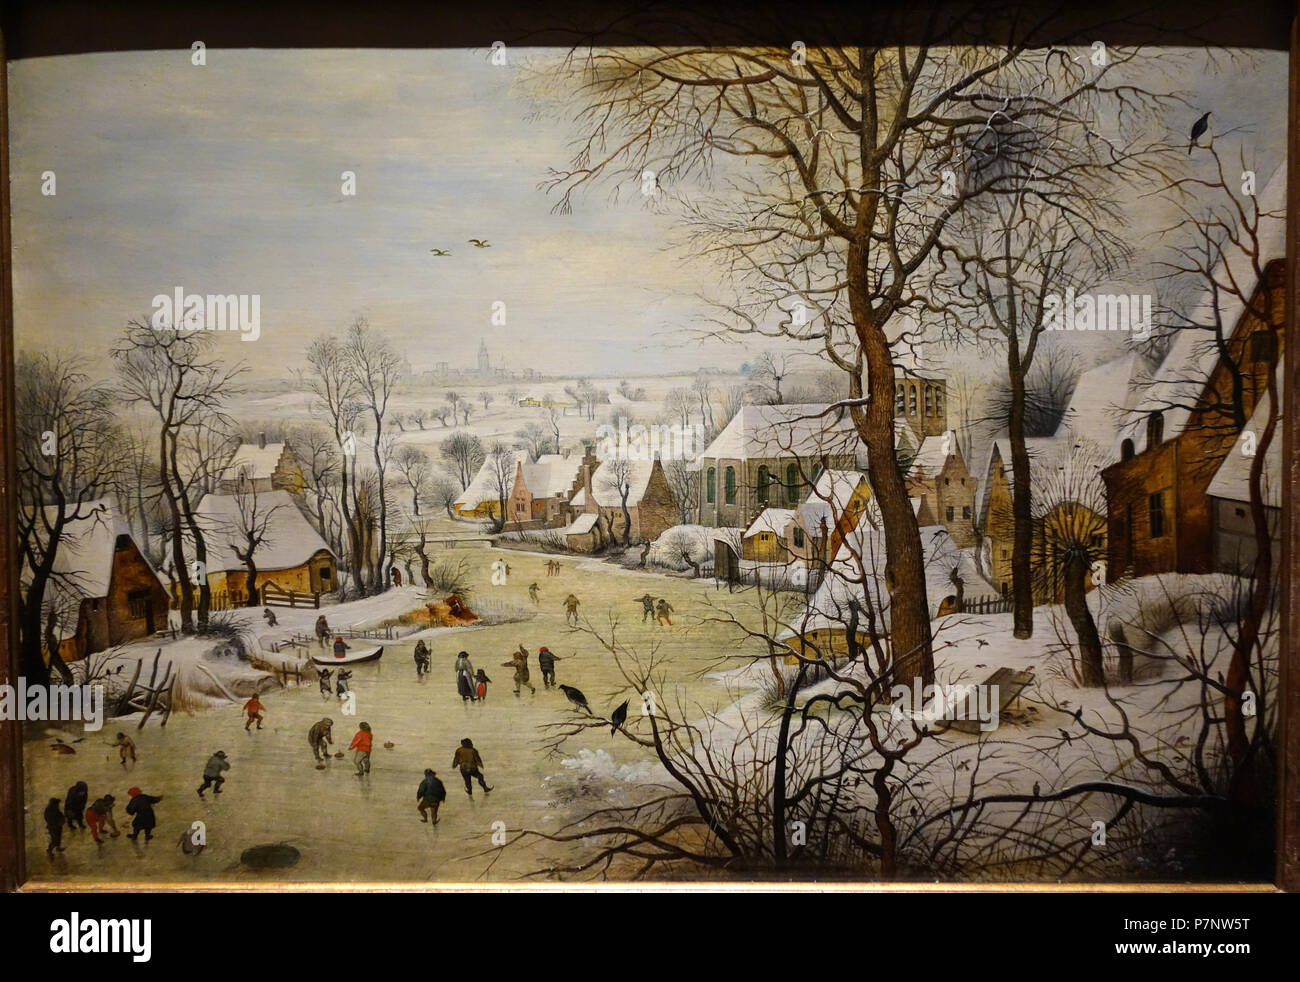 N/A. N/A 402 Winter Landscape with Bird Trap, by Pieter Brueghel the Younger, late 1500s to early 1600s, oil on panel - National Museum of Western Art, Tokyo - DSC08409 Stock Photo